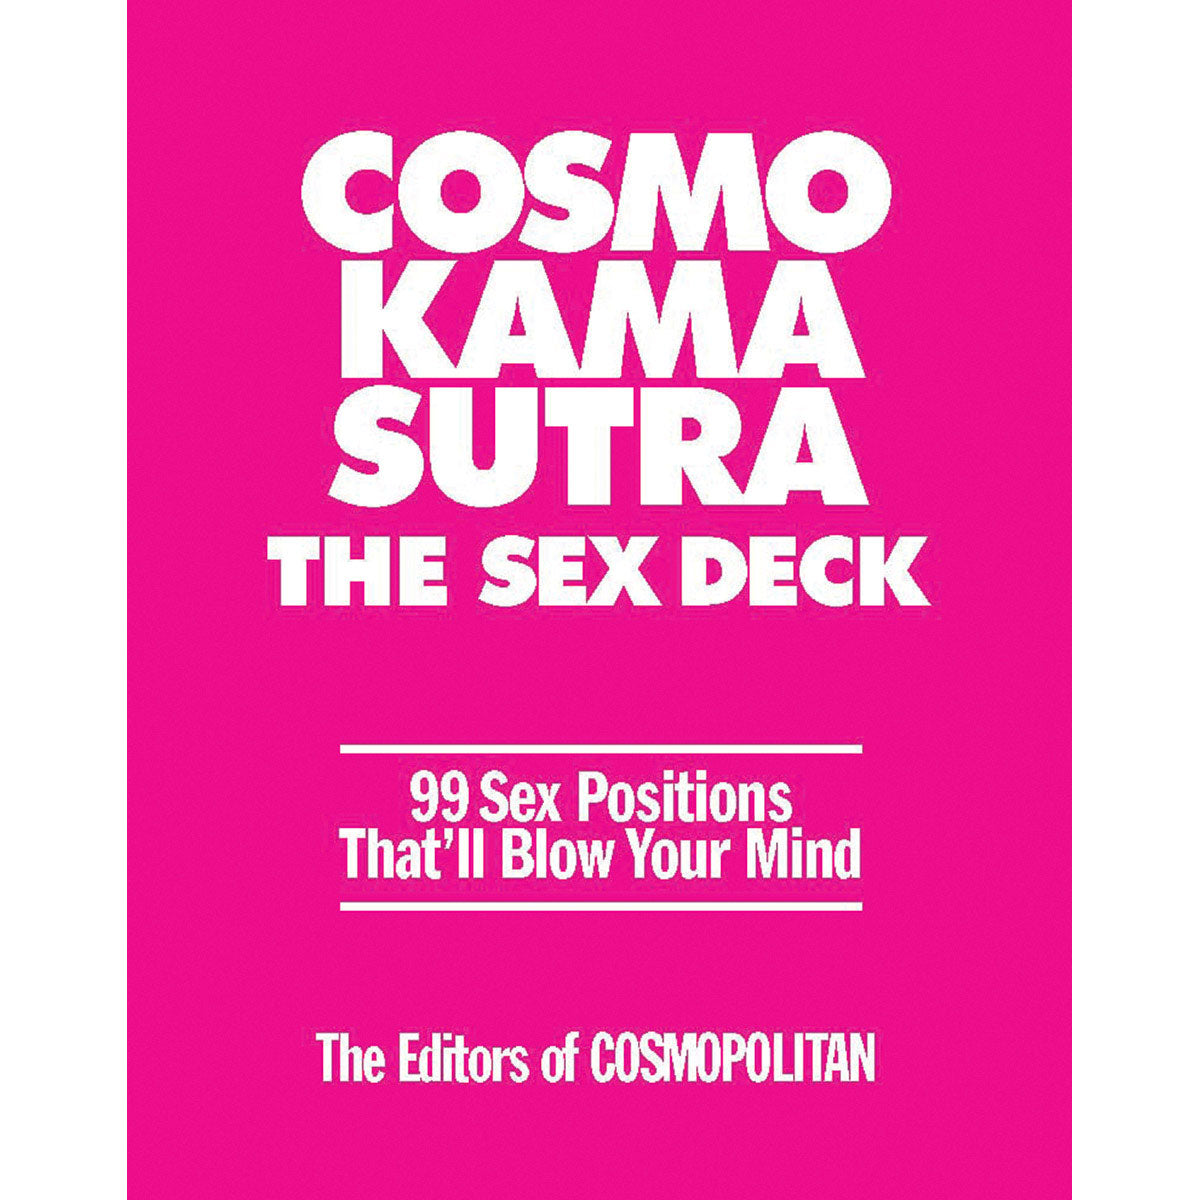 Cosmo Kama Sutra Sex Deck - 99 Sex Positions That Will Blow Your Mind